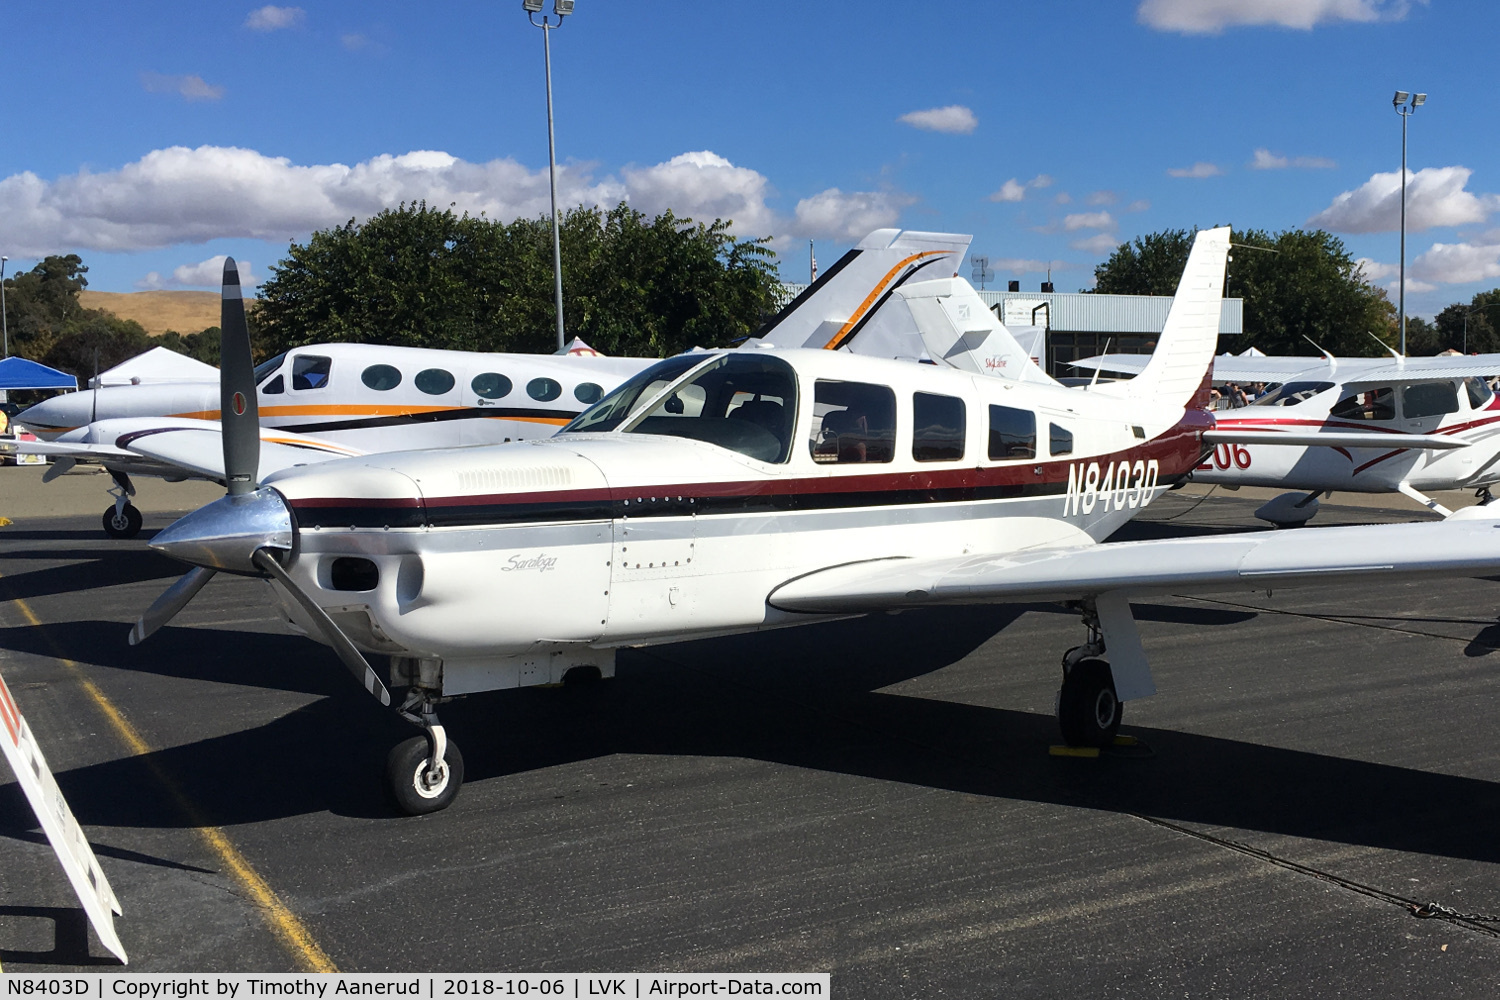 N8403D, 1981 Piper PA-32R-301T Turbo Saratoga C/N 32R-8129078, 1981 Piper PA-32R-301T, c/n: 32R-8129078, 2018 Livermore Open House